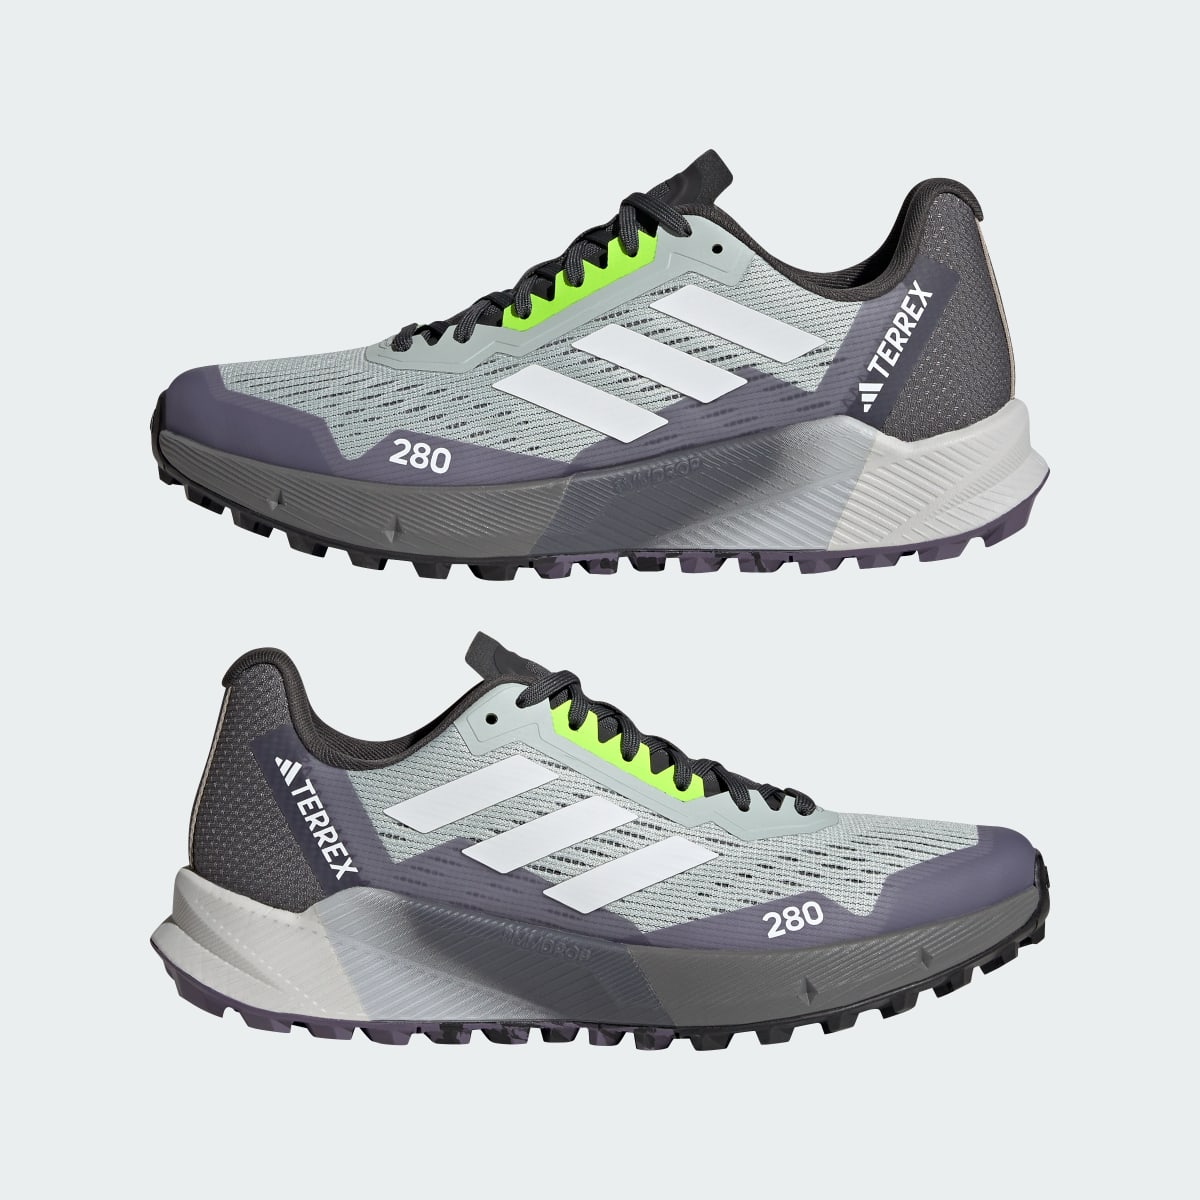 Adidas Terrex Agravic Flow 2.0 Trail Running Shoes. 8